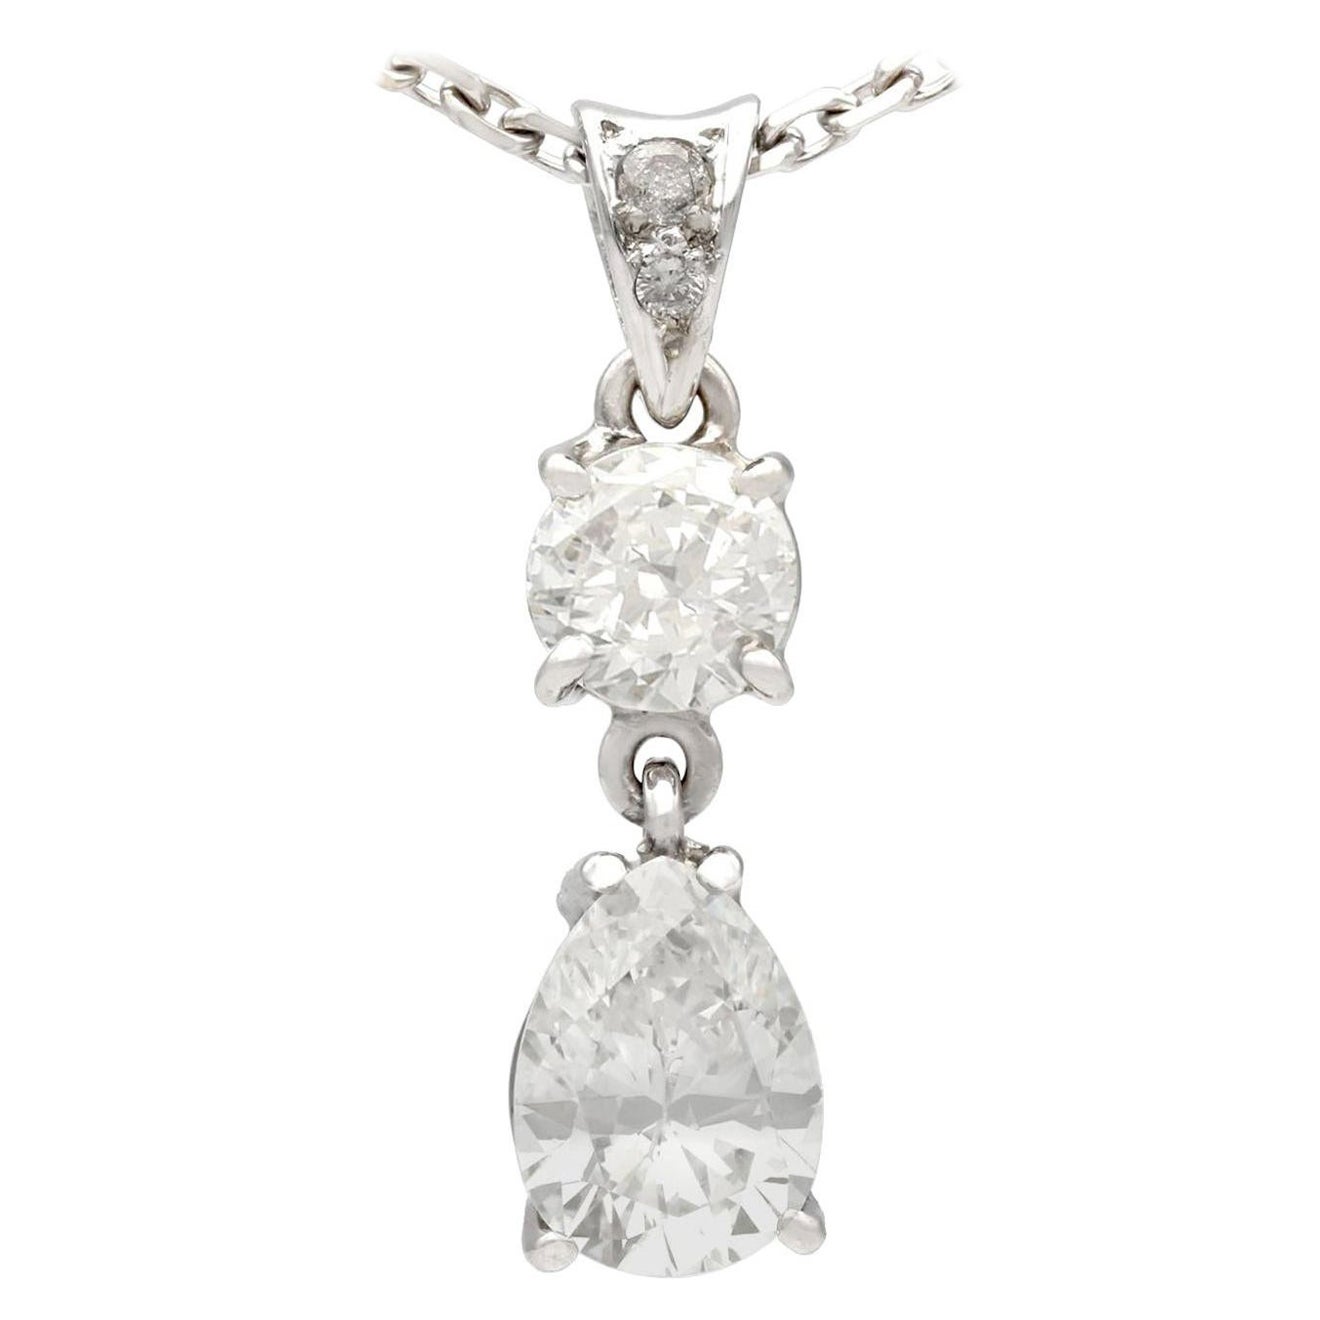 1990s French 1.55 Carat Diamond and White Gold Pendant For Sale